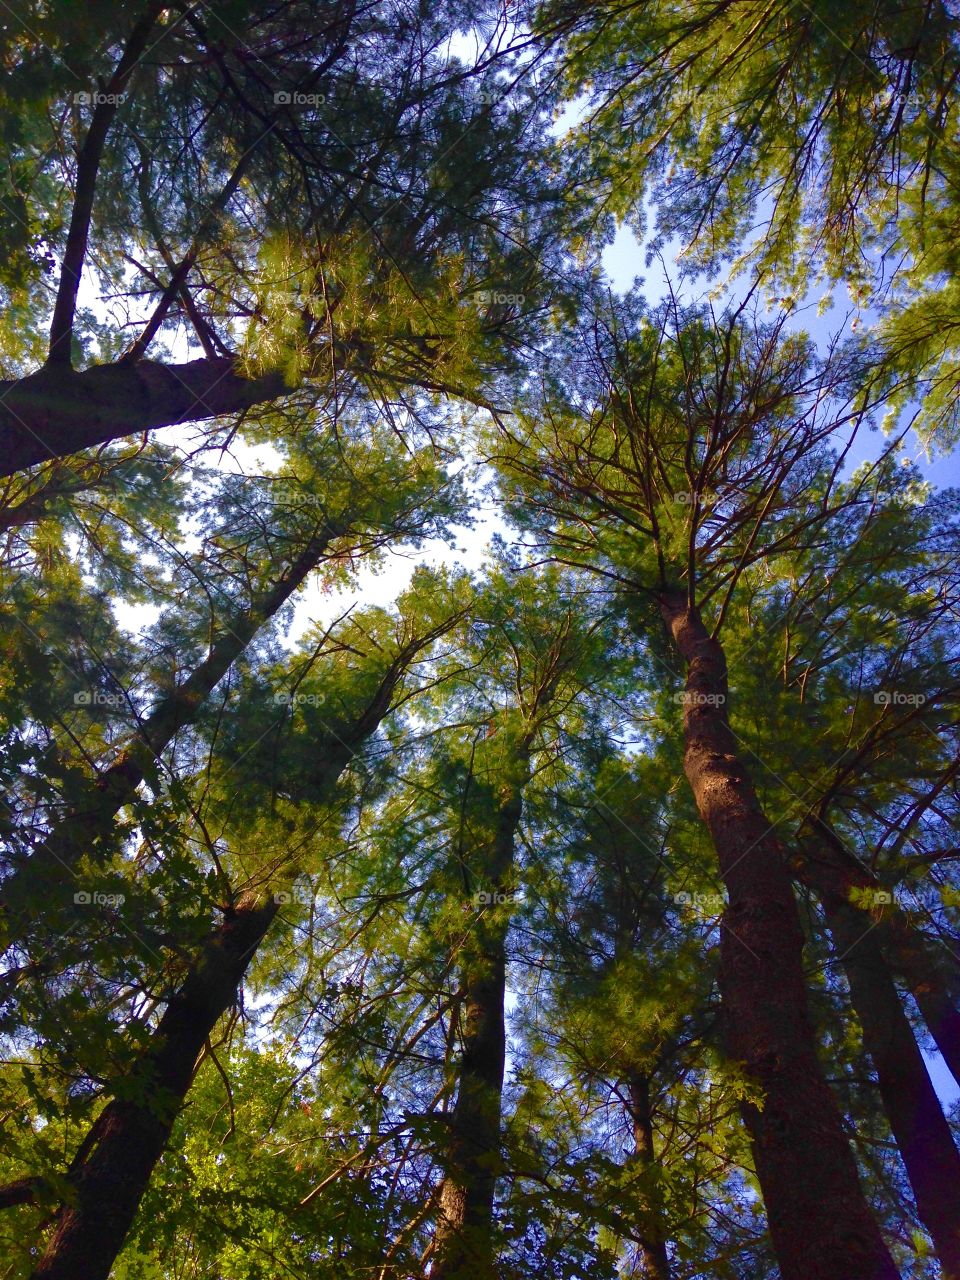 Our Pine Grove Canopy. Photo taken Looking Up from the center of our pine grove. Sun was shining through, very pretty!